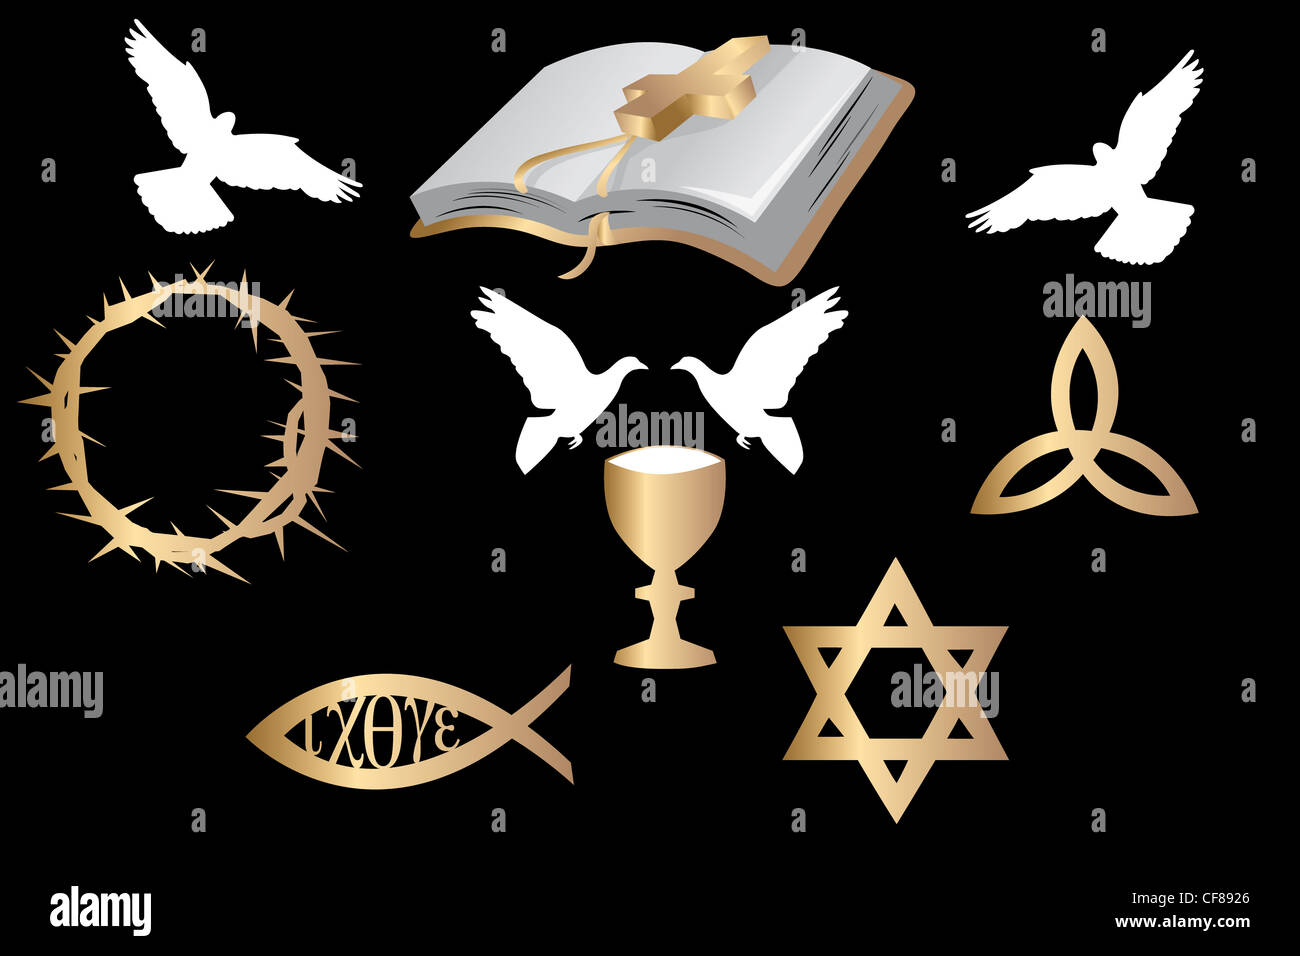 various religious symbols and doves isolated on black background Stock Photo